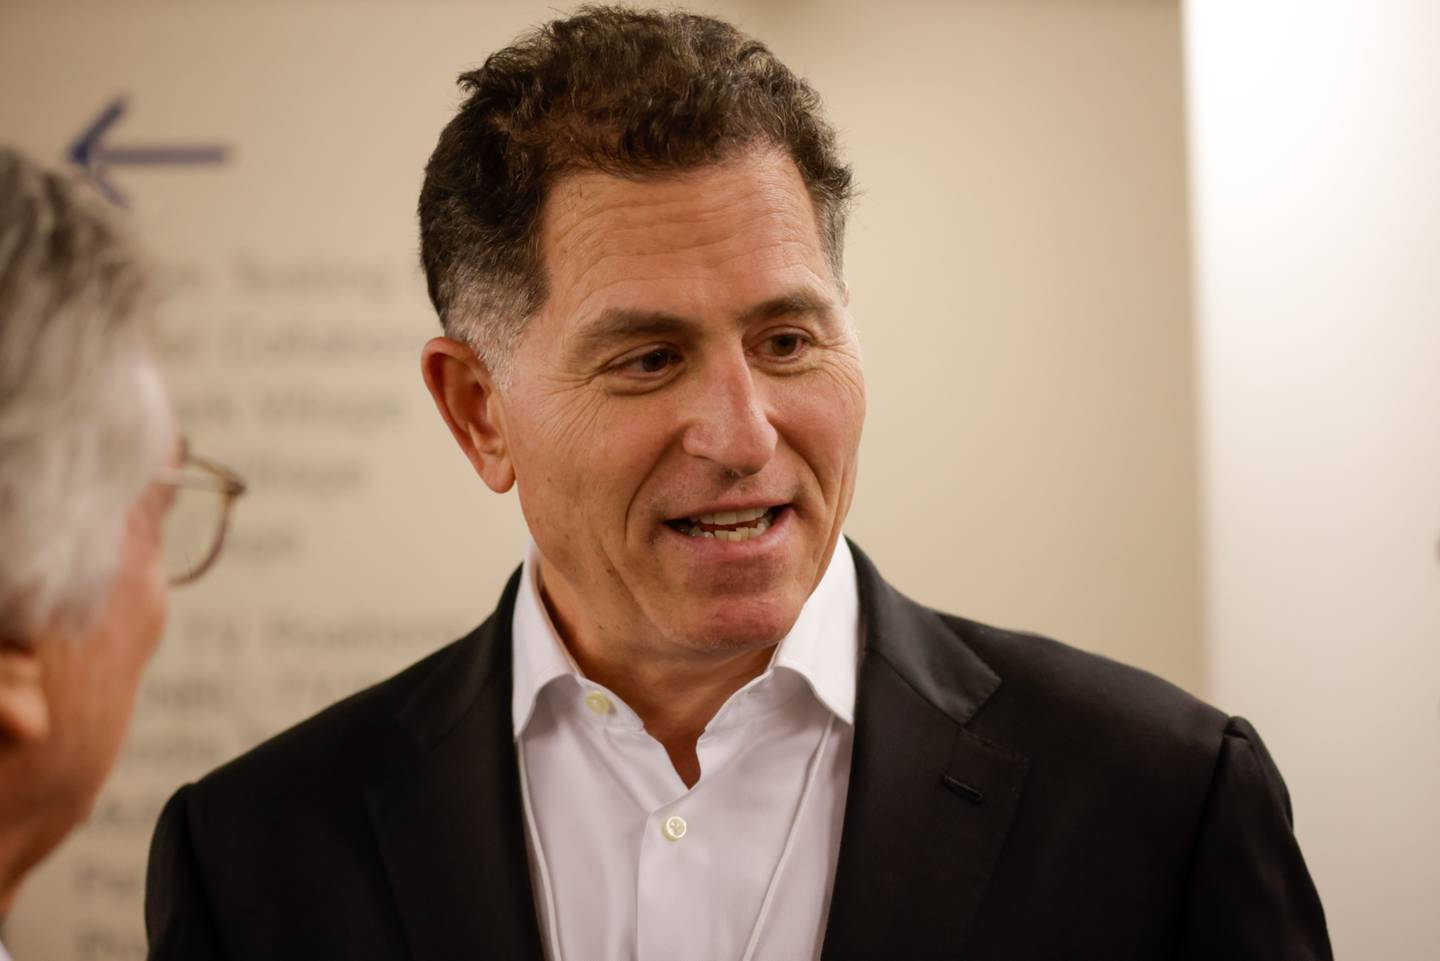 Michael Dell, the billionaire chairman and chief executive of Dell Technologies, find himself at the centre of yet another tech deal. Bloomberg